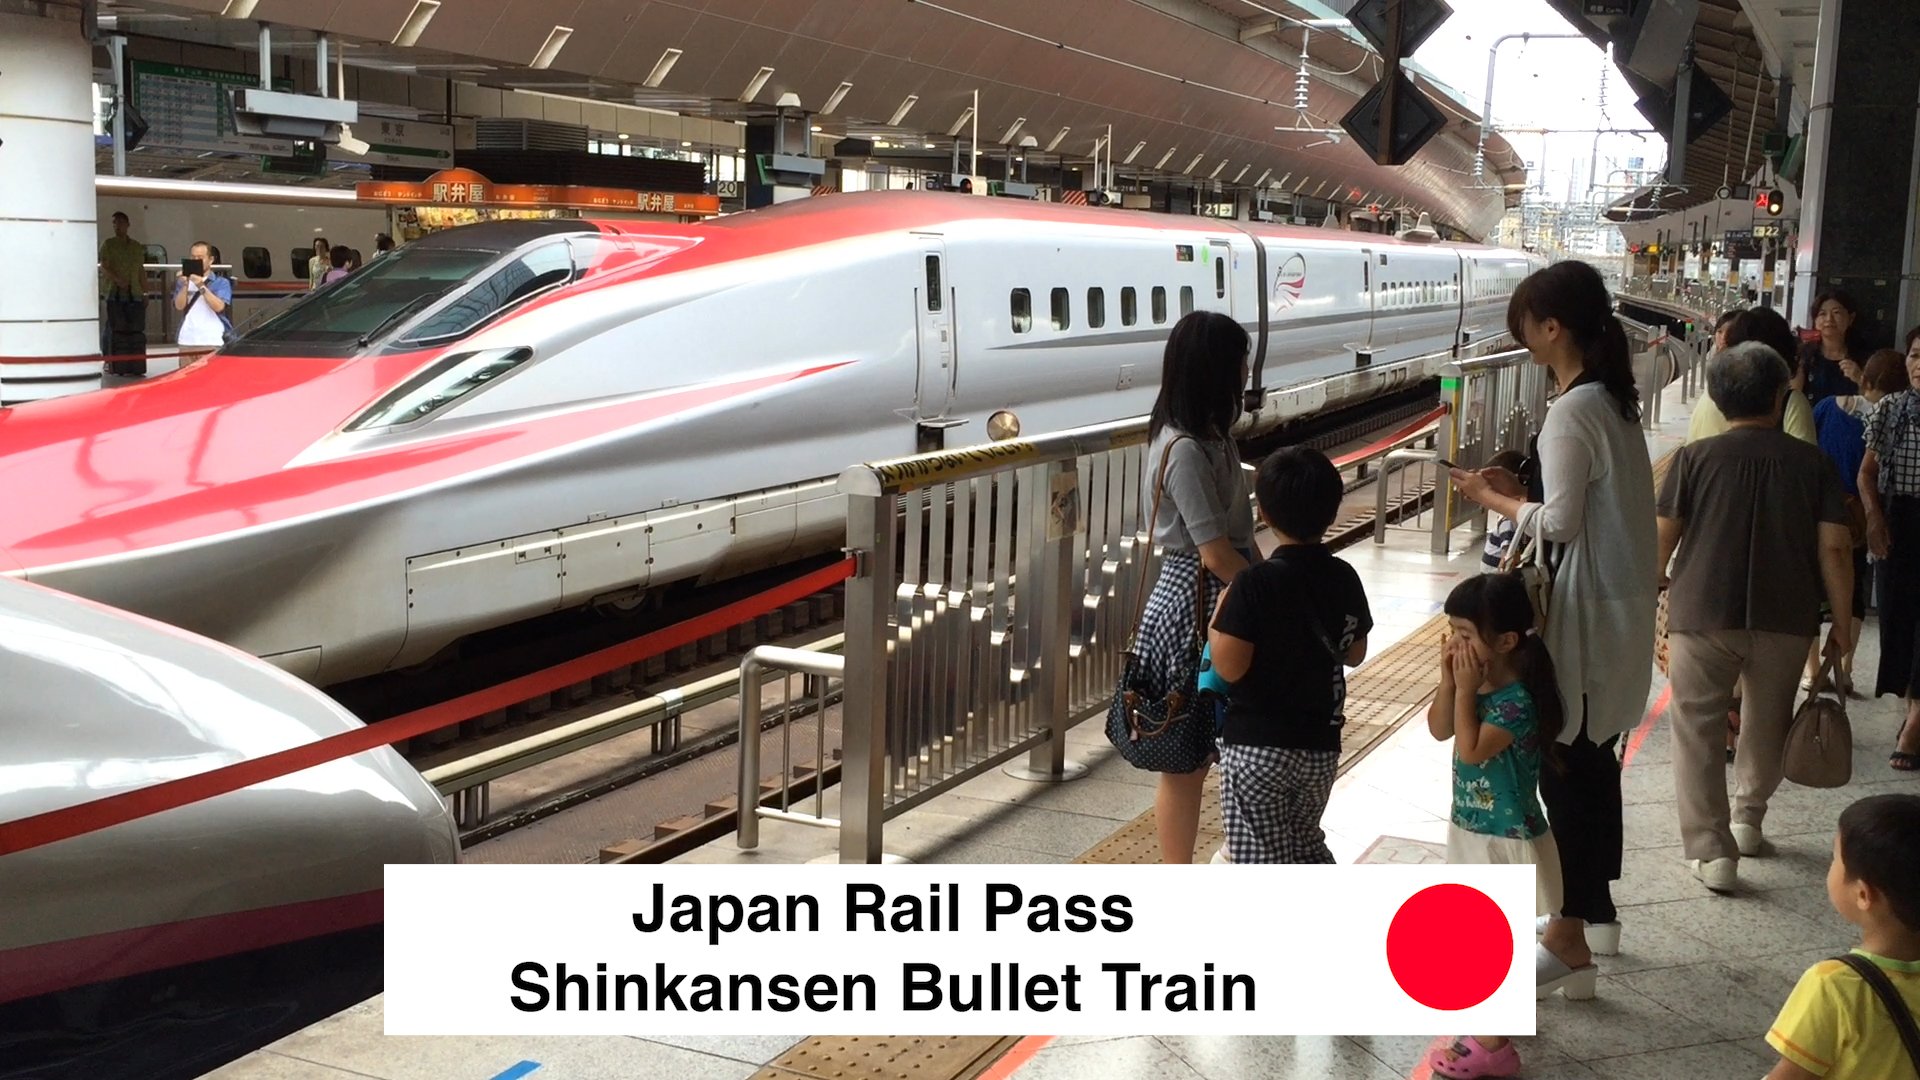 Japan Rail Bullet Train - Where To Buy Japan Rail Pass How To Use JR Pass In Tokyo. JR Pass Price